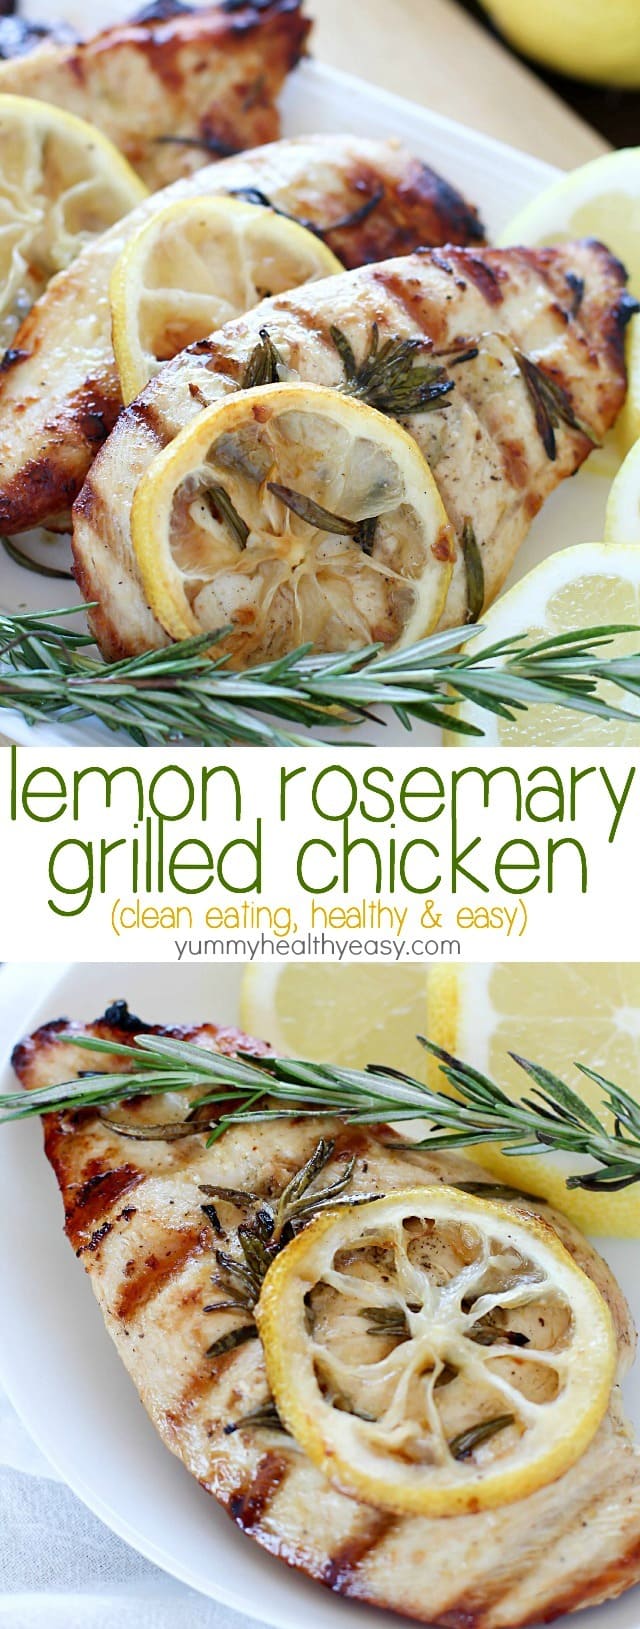 This clean-eating Grilled Lemon Rosemary Chicken recipe is easy to make, healthy and bursting with lemony flavor! #FosterFarmsFresh #AD